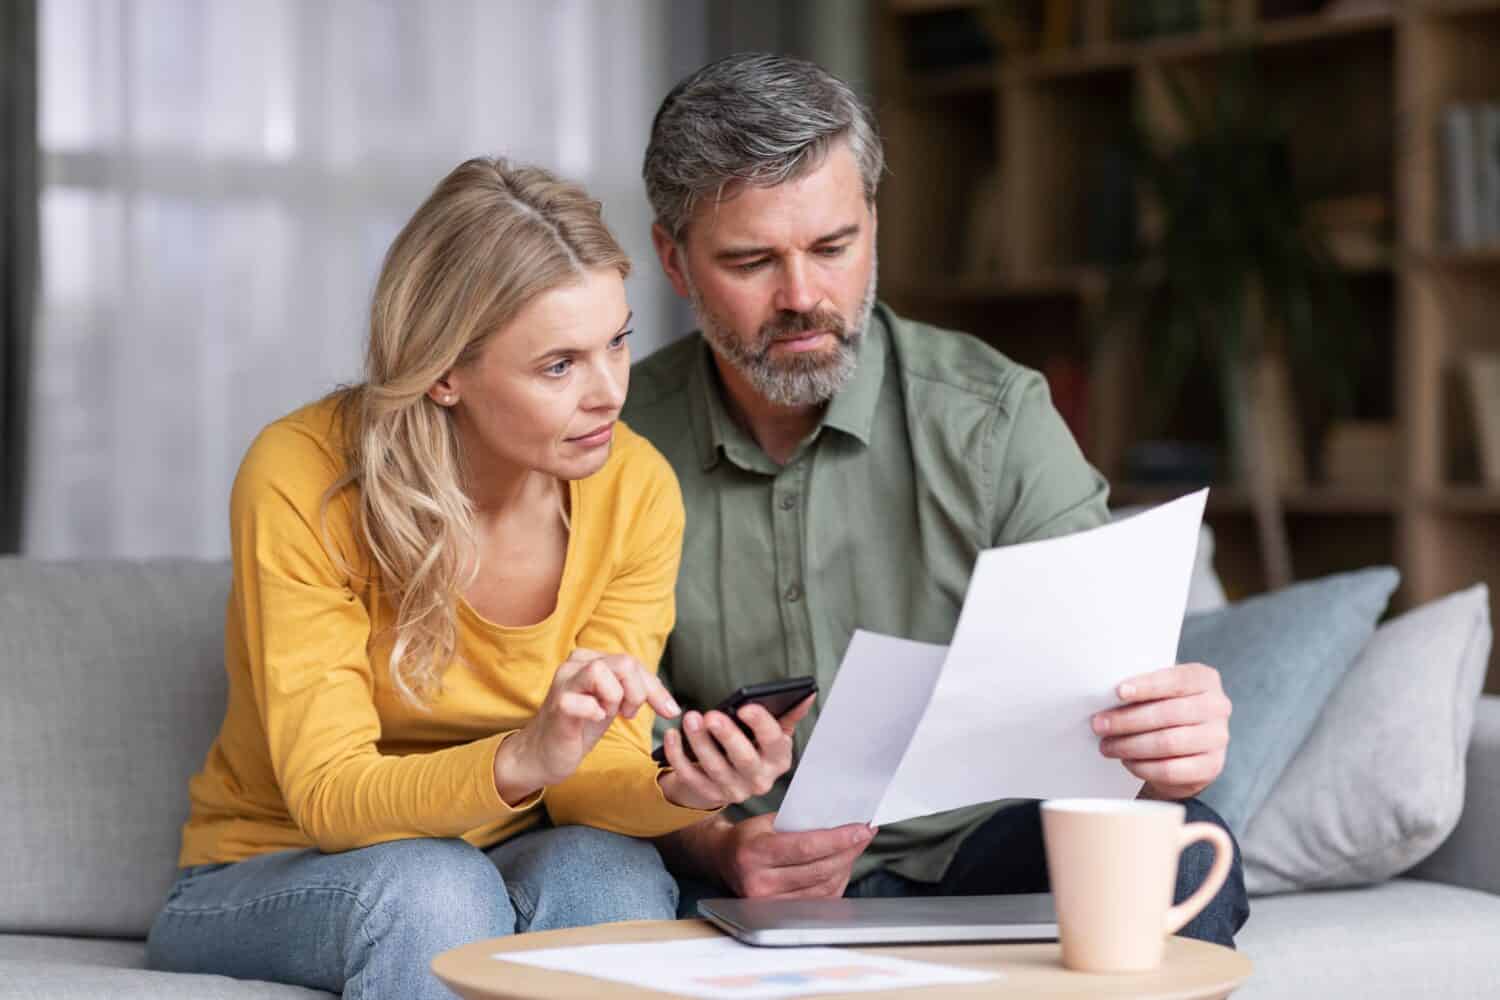 Married Middle Aged Couple Planning Budget Together, Reading Papers And Calculating Spends While Sitting On Couch In Living Room, Husband And Wife Checking Documents And Accounting Taxes, Closeup